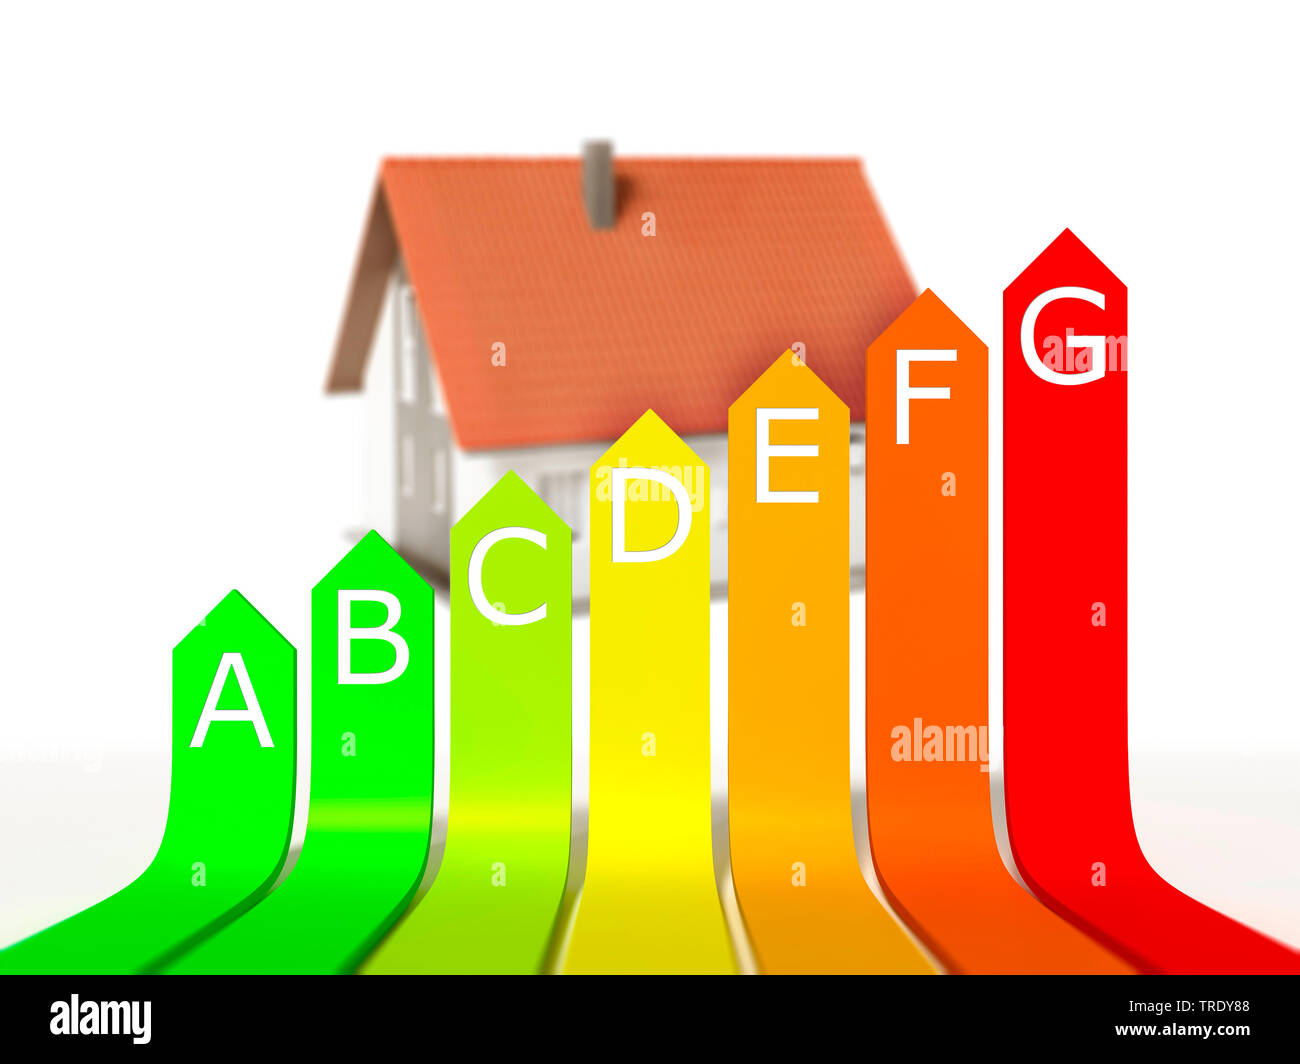 Sign of European Union energy label against background of a residental house Stock Photo